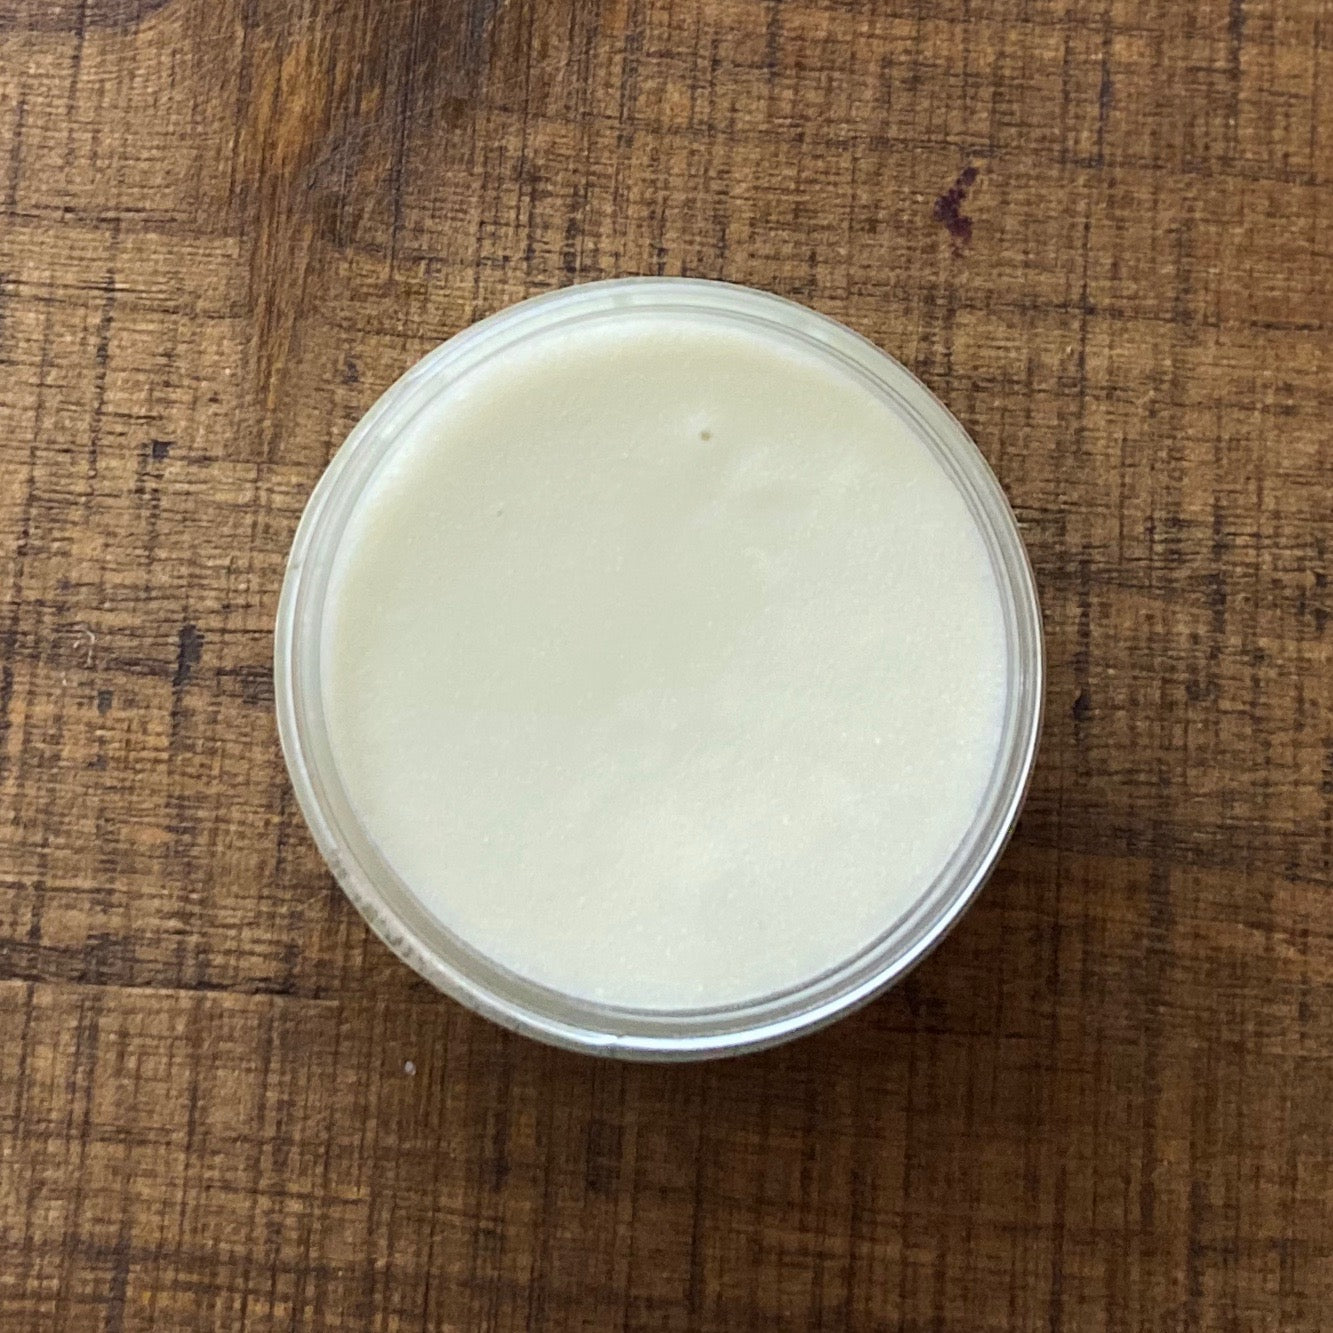 Look at the inside of the jar, creamy balm